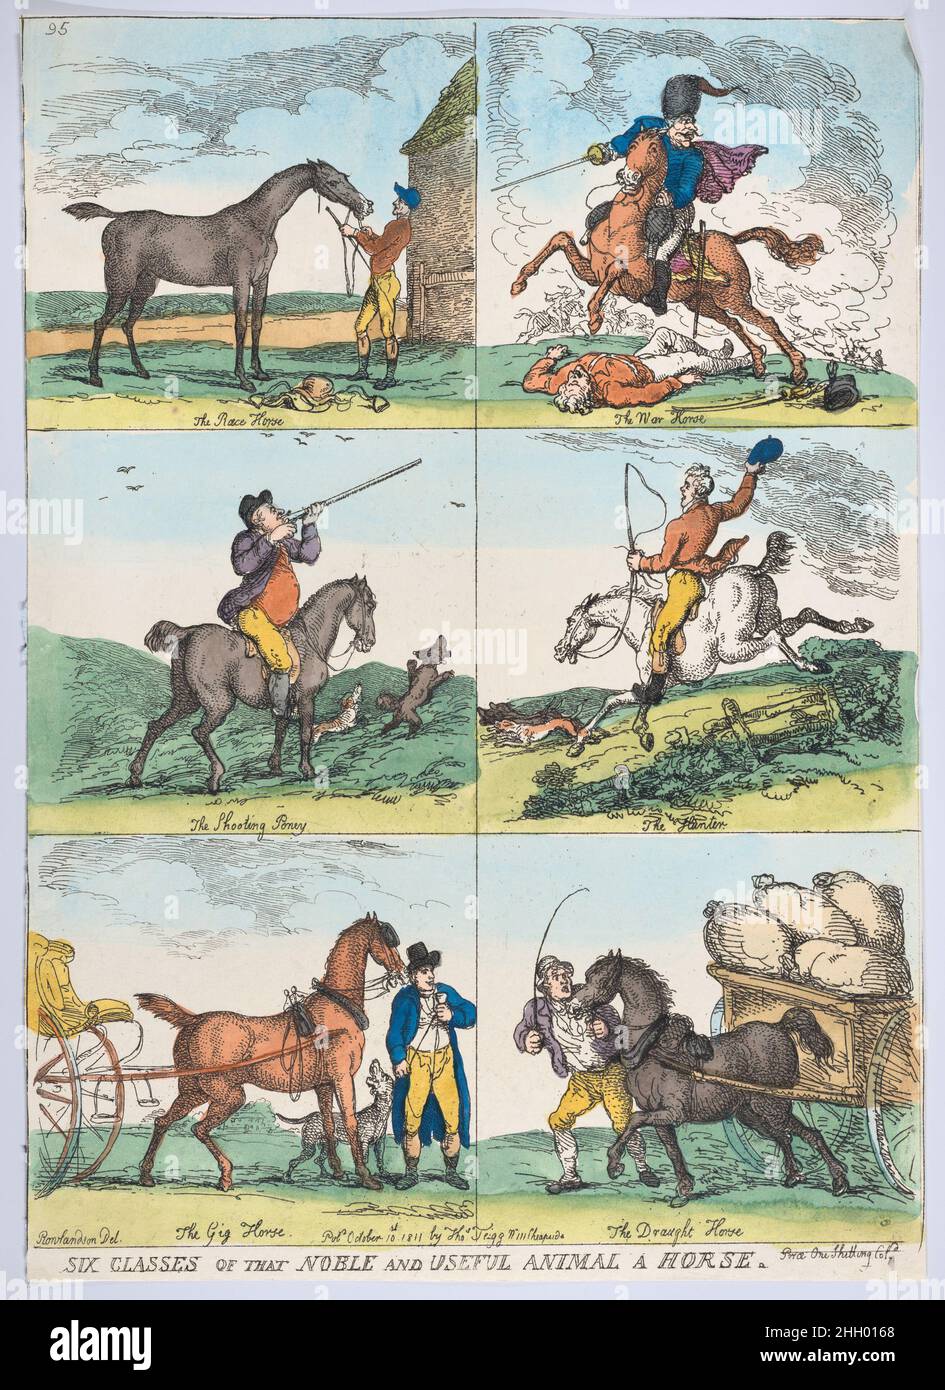 Six Classes of the Noble and Useful Animal a Horse October 10, 1811 Thomas Rowlandson Six images: The Race Horse, The War Horse, The Shooting Pony, The Hunter, The Gig Horse, and The Draught Horse.. Six Classes of the Noble and Useful Animal a Horse. Thomas Rowlandson (British, London 1757–1827 London). October 10, 1811. Hand-colored etching. Thomas Tegg (British, 1776–1846). Prints Stock Photo